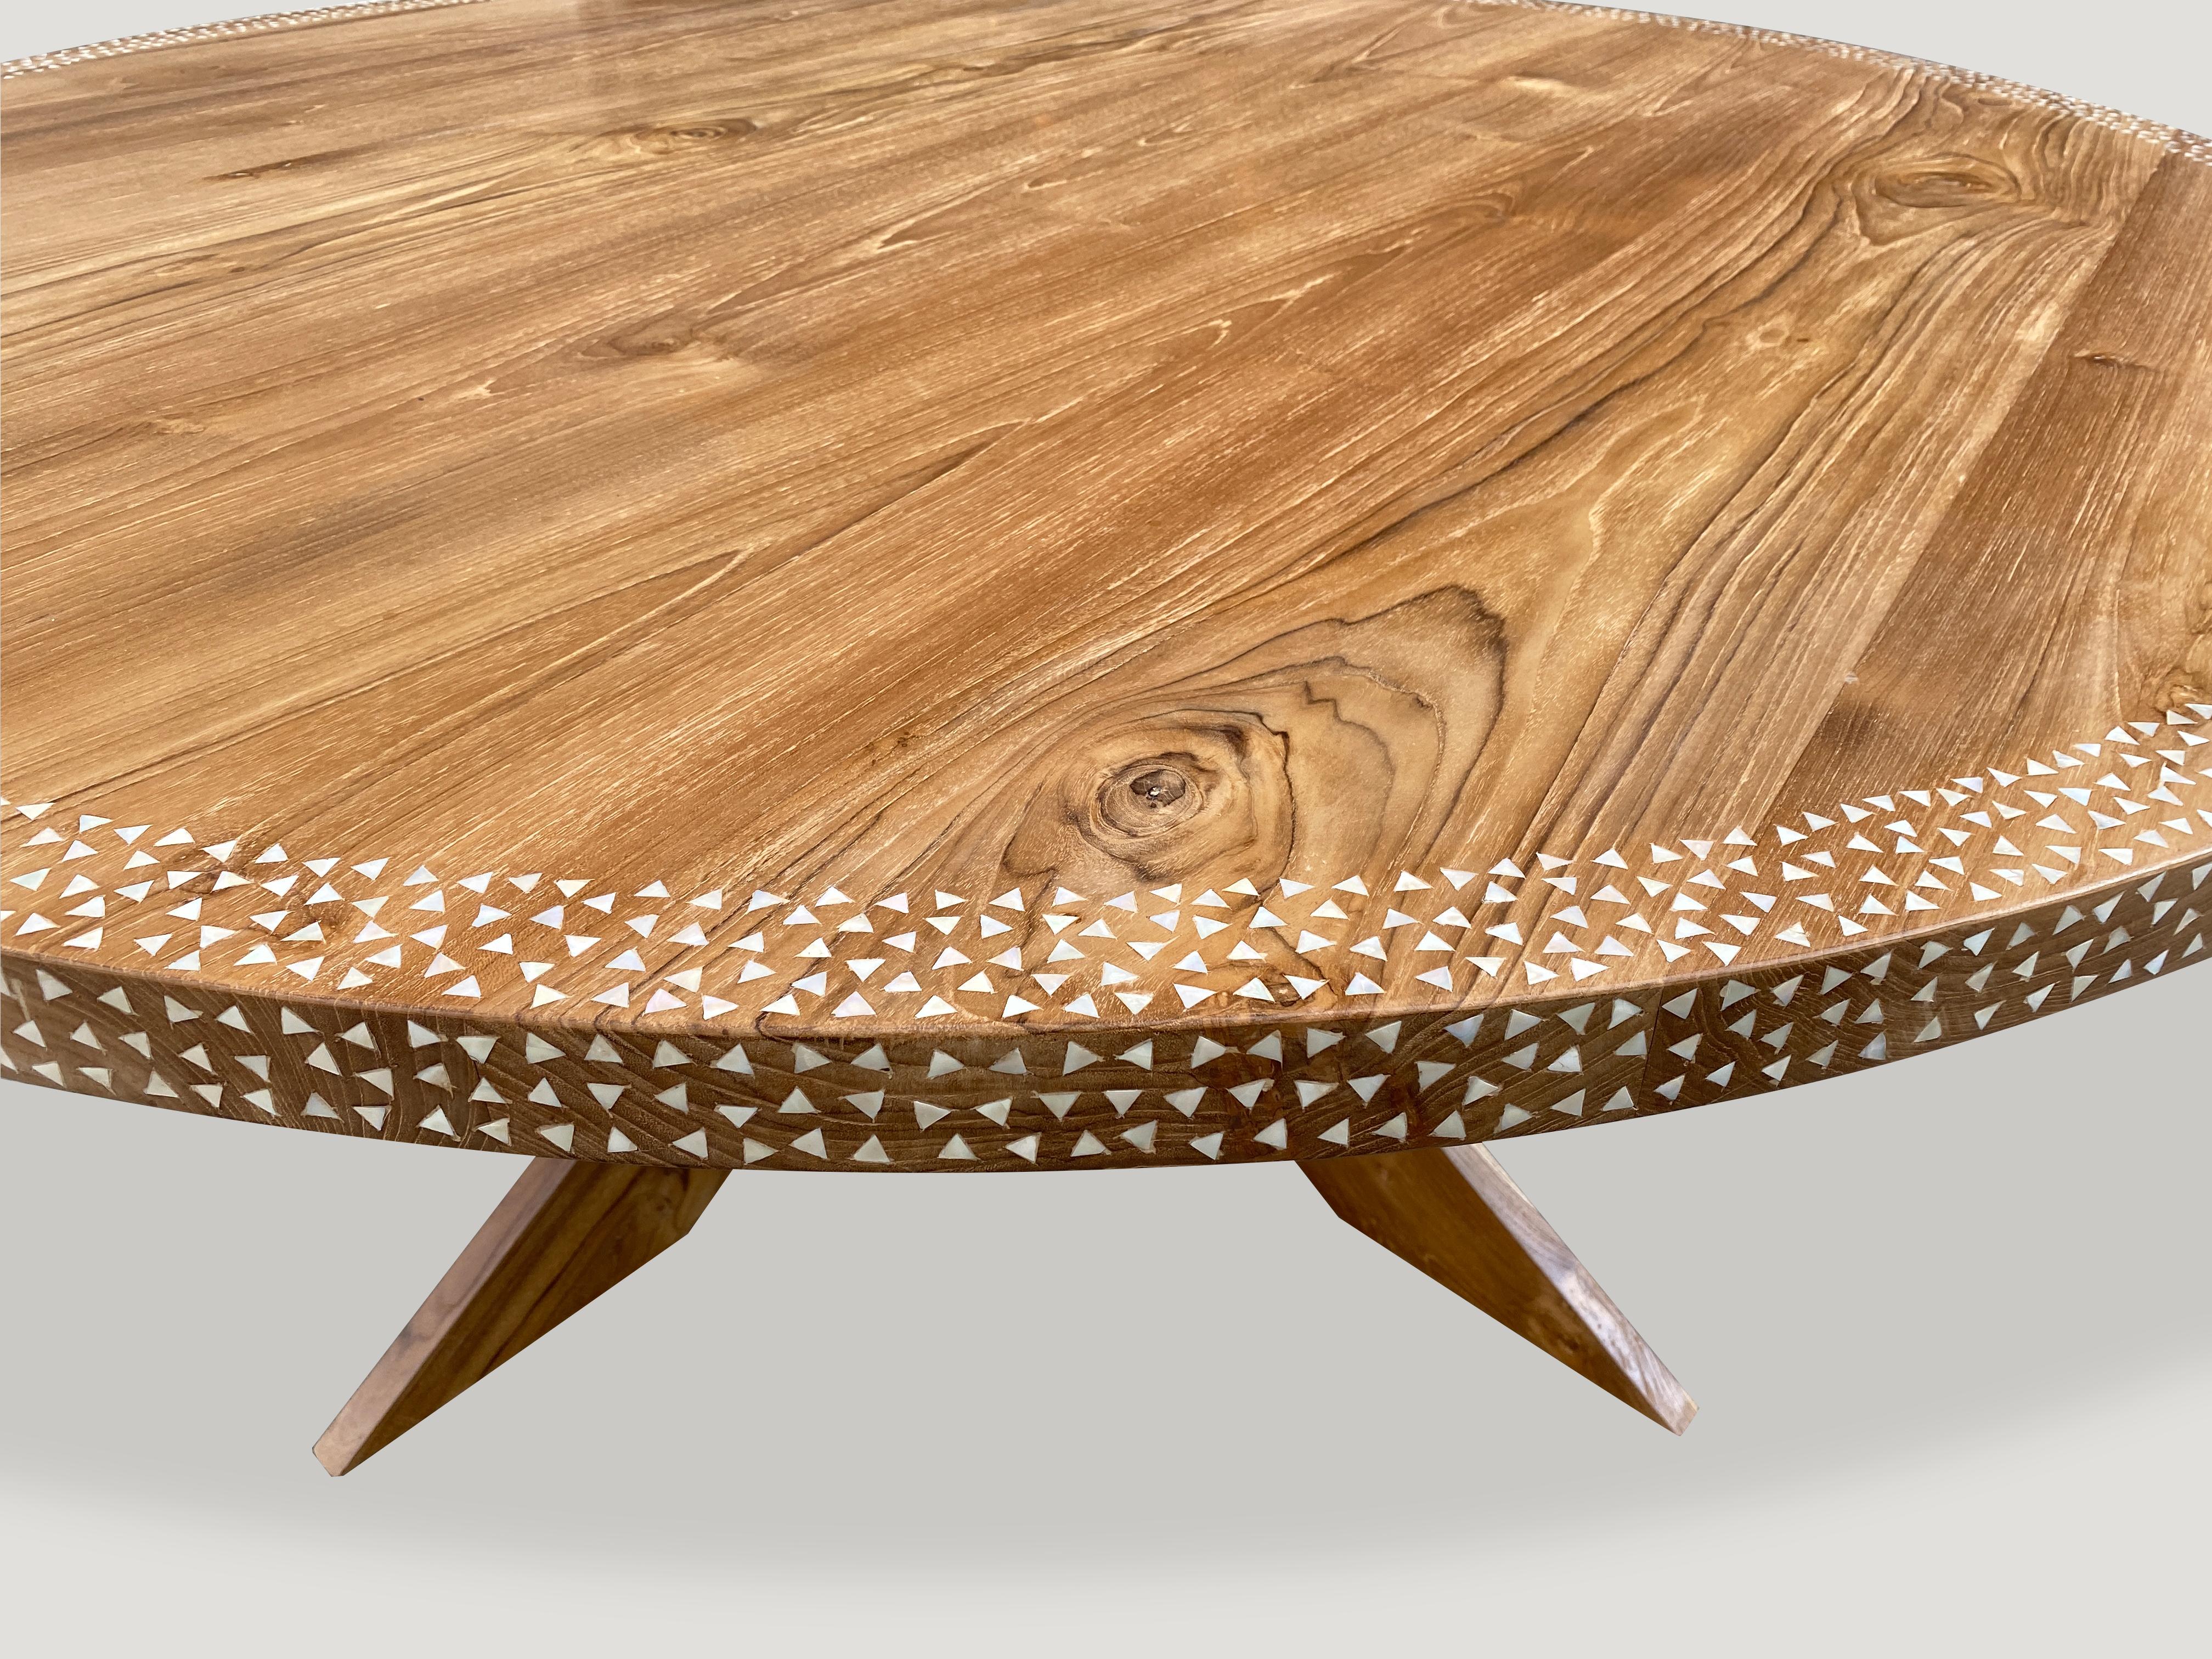 Andrianna Shamaris Round Shell Inlaid Teak Wood Dining Table In Excellent Condition For Sale In New York, NY